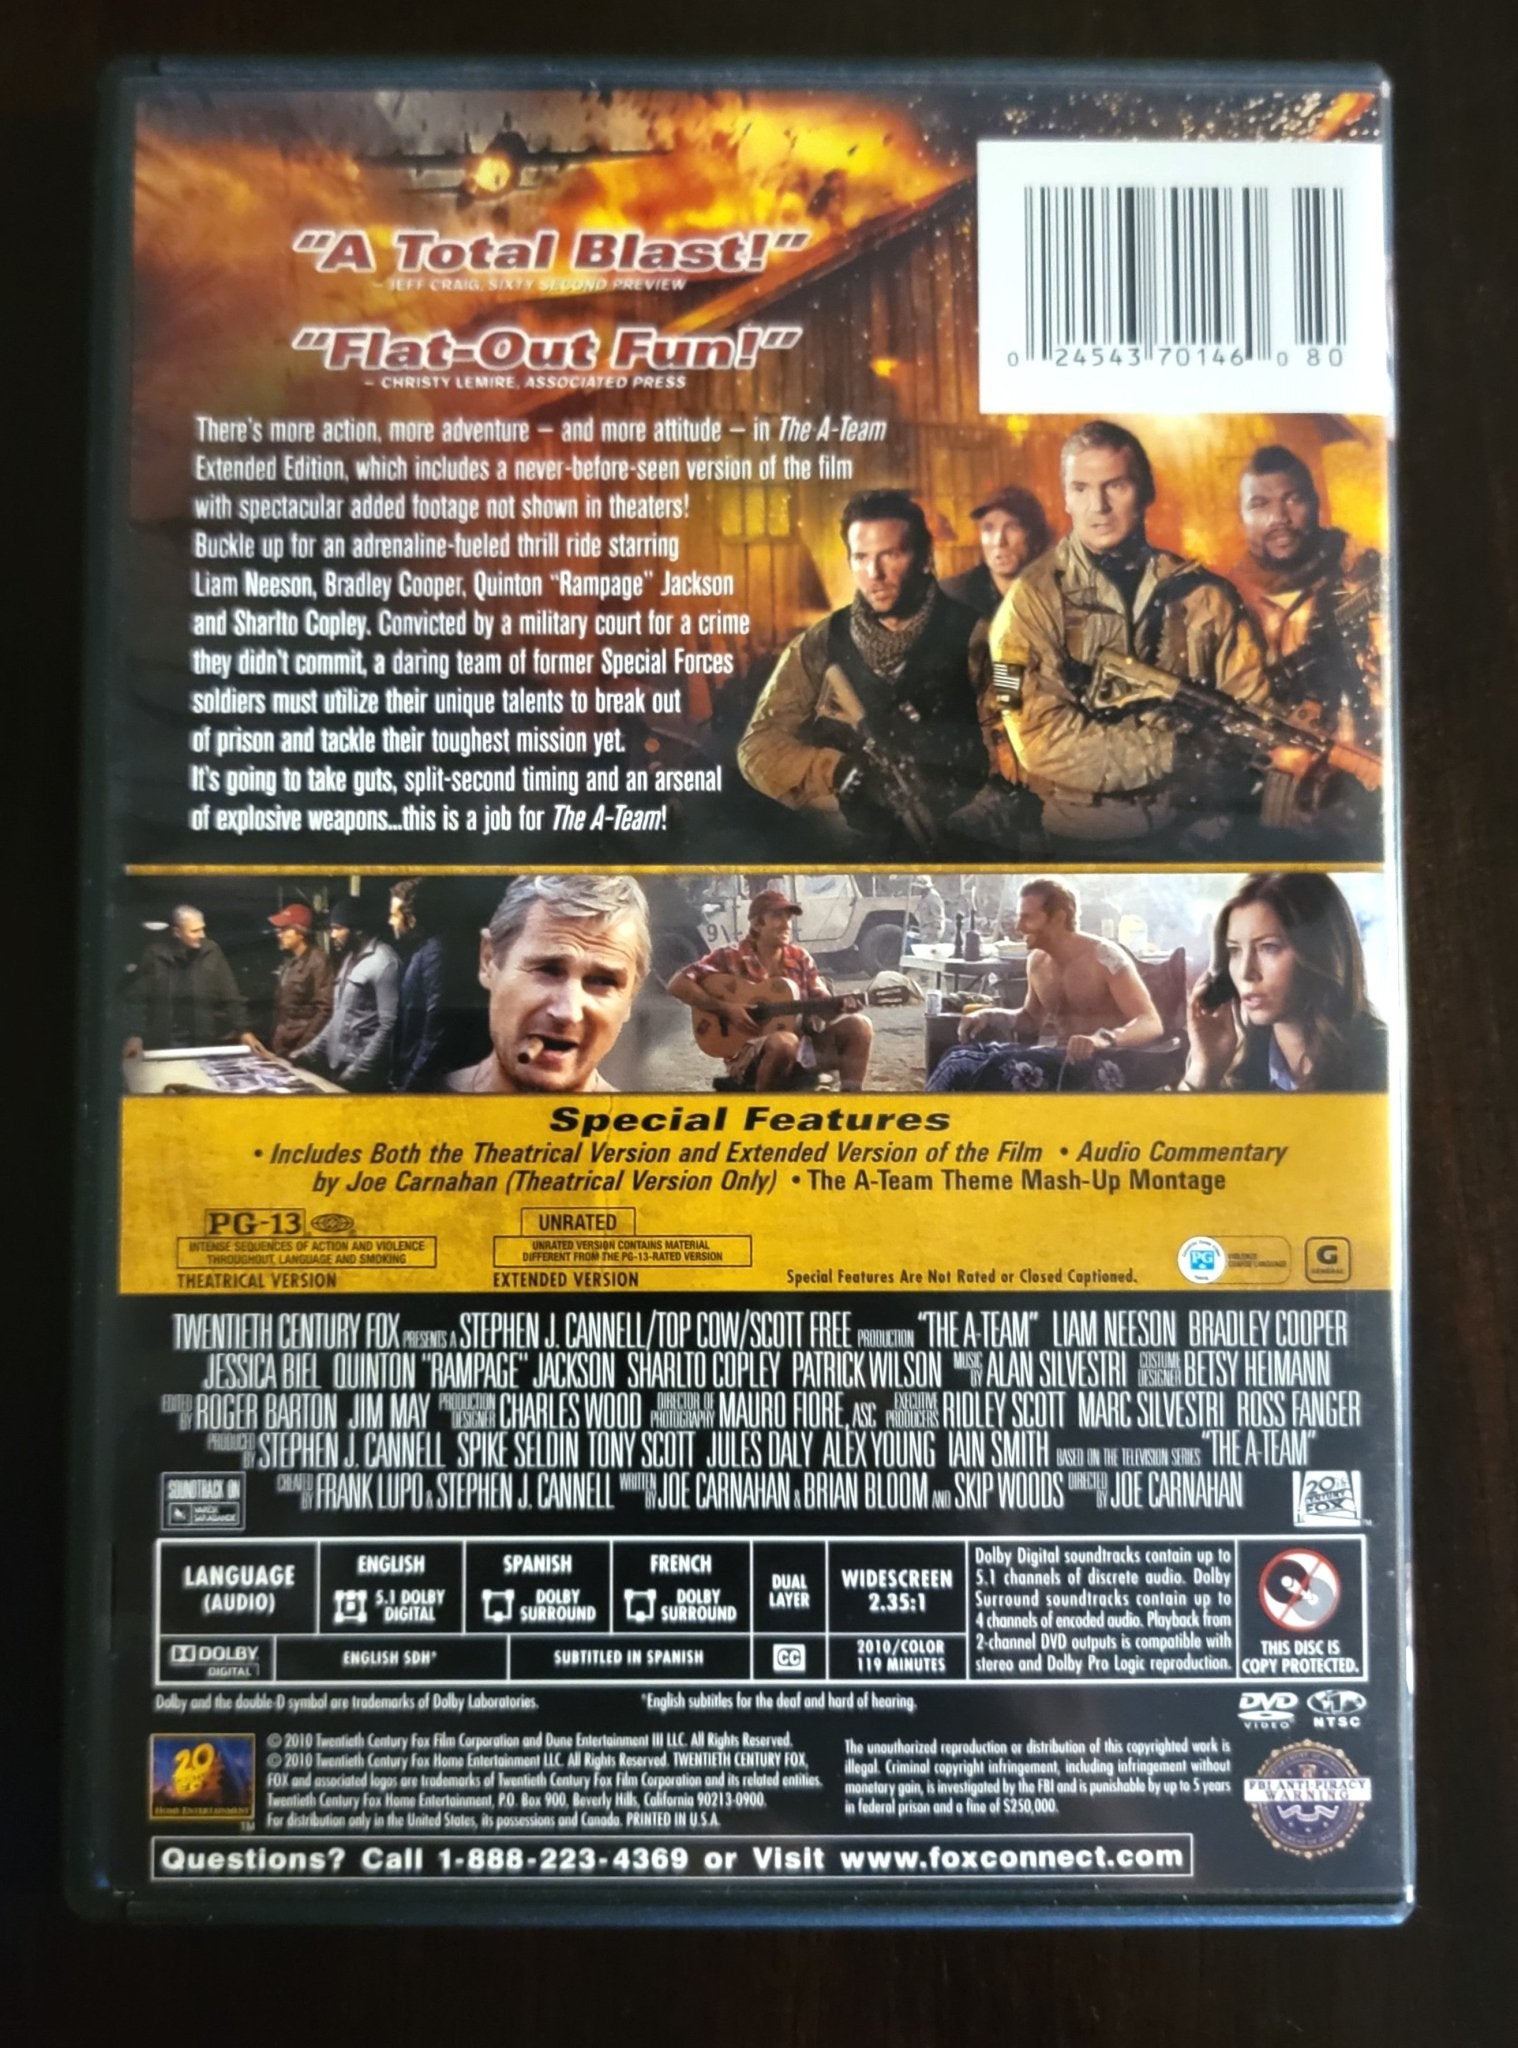 20th Century Fox Home Entertainment - The A-Team | DVD | Unrated Extended Cut Includes 2 Versions: Unrated & Theatrical - DVD - Steady Bunny Shop